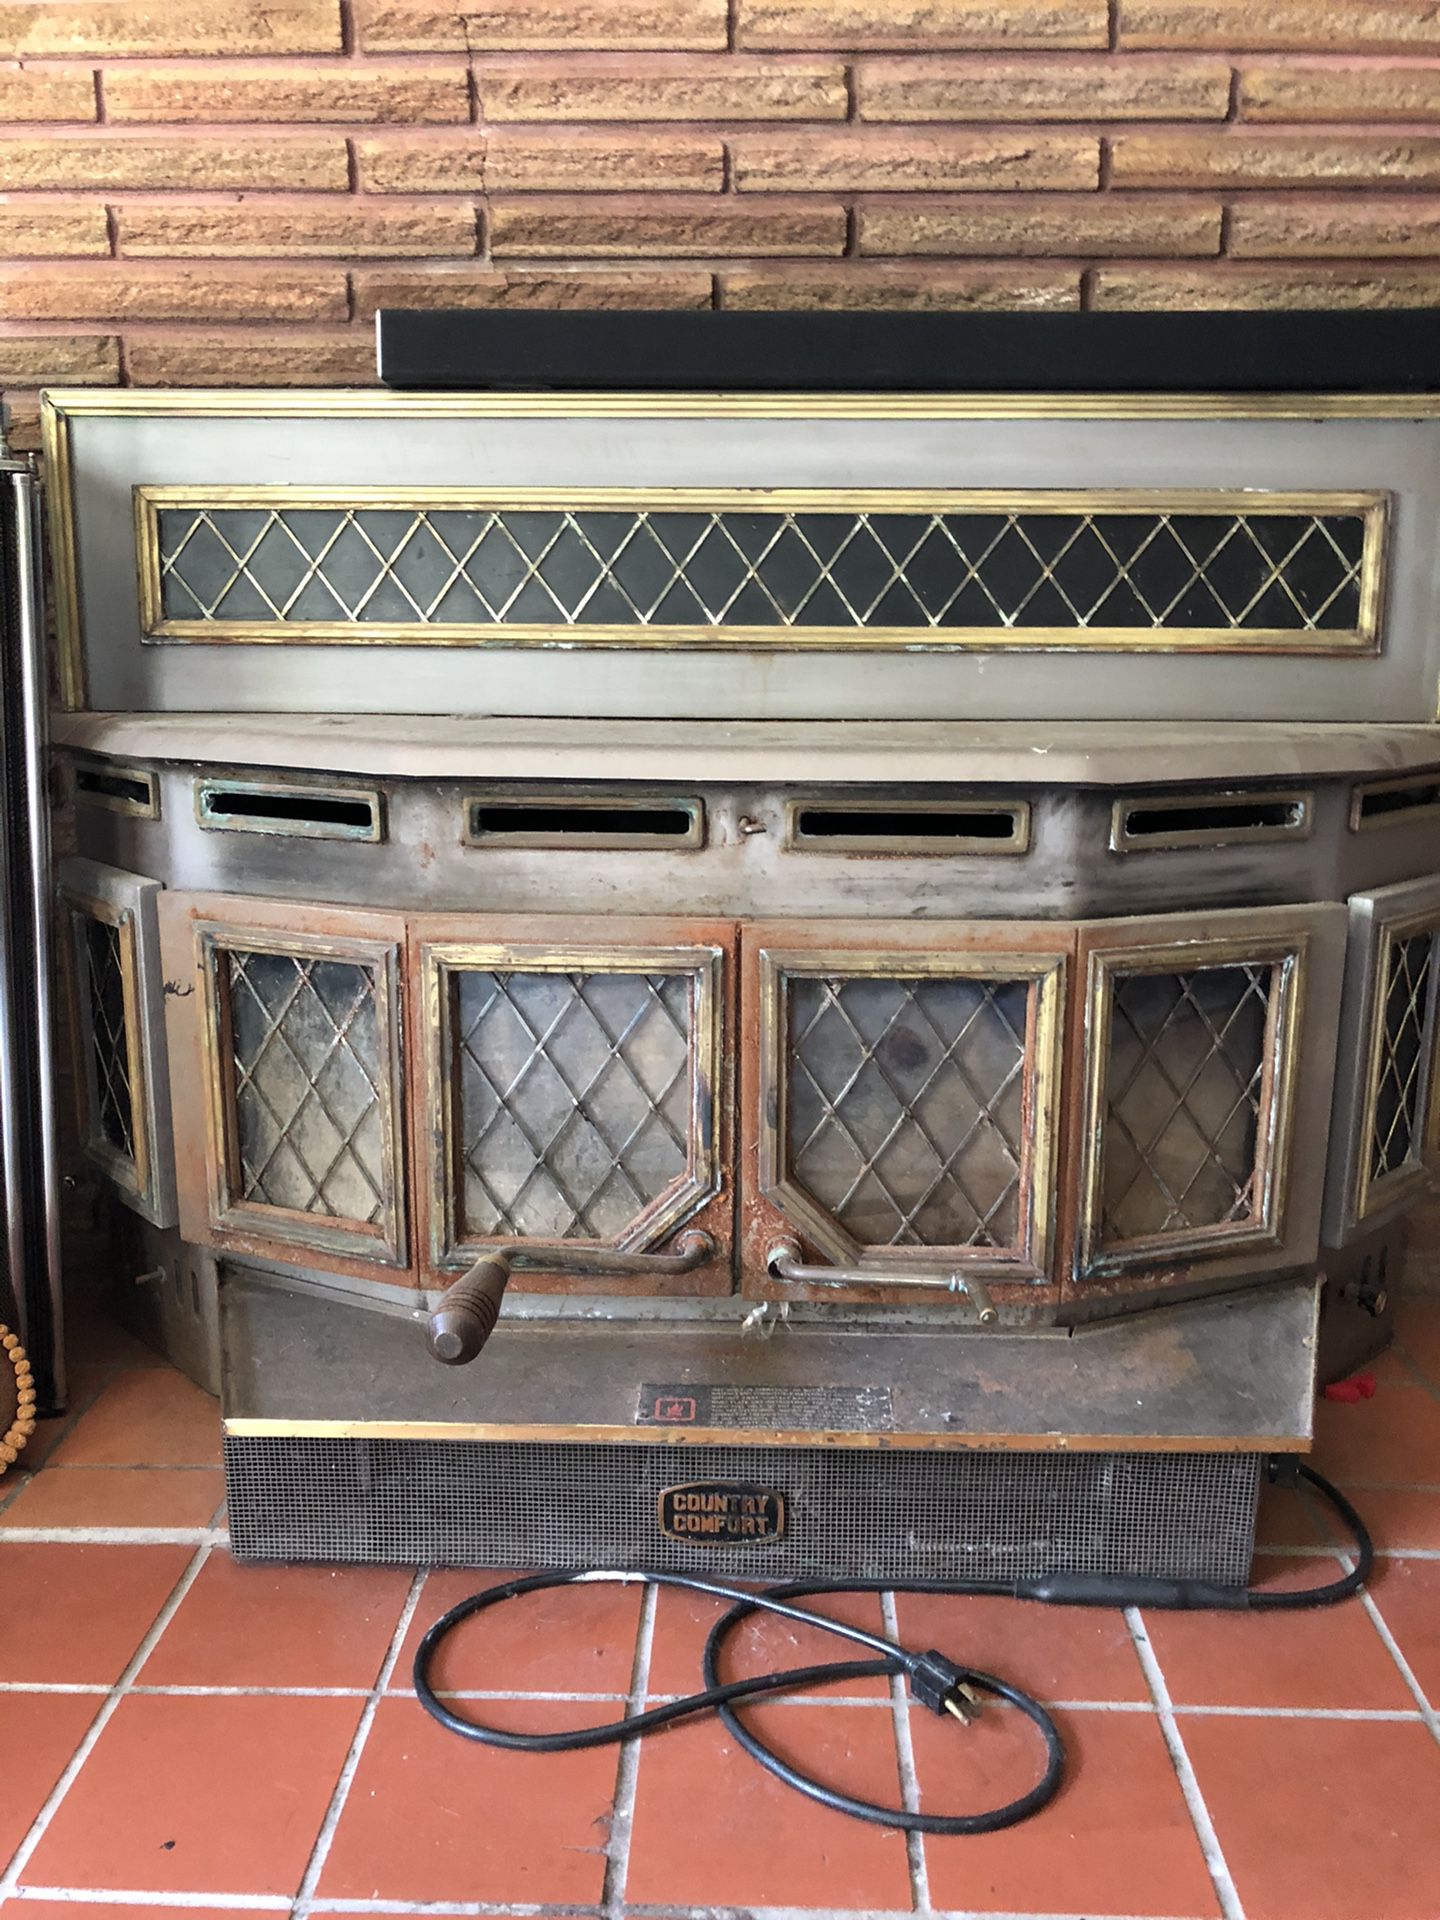 Country Comfort wood/electric stove